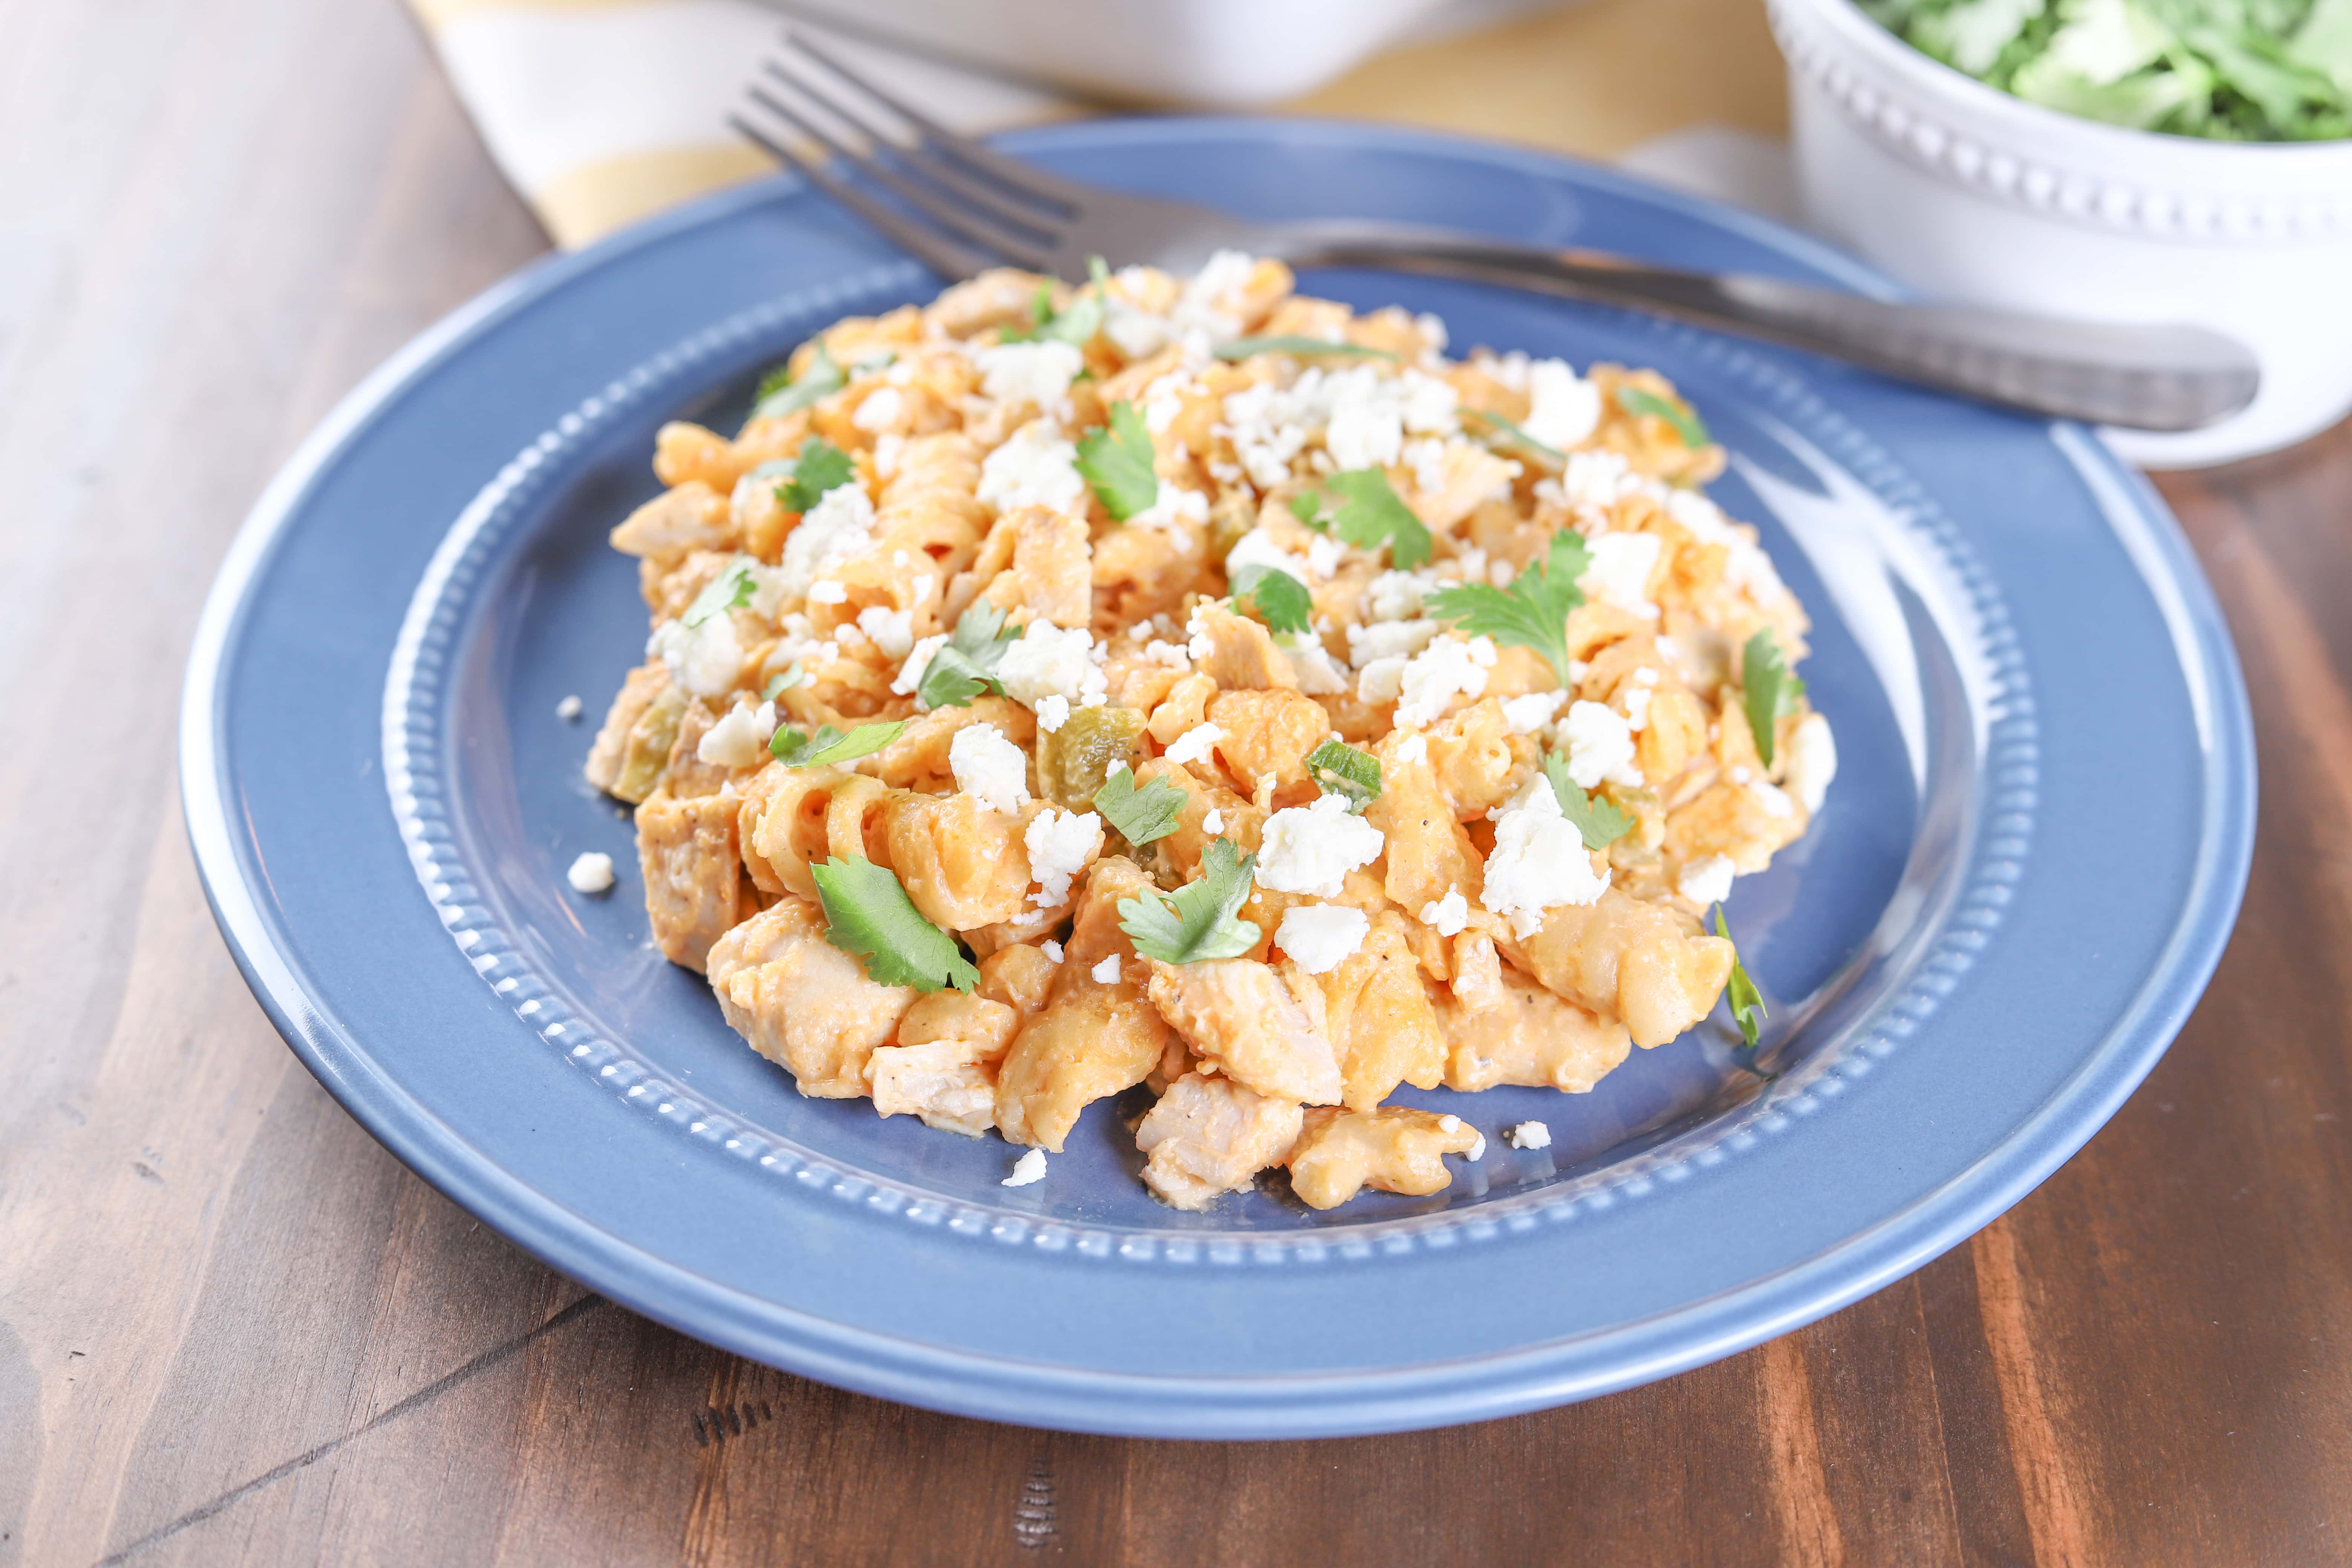 Lightened Up Slow Cooker Buffalo Chicken Pasta Recipe from A Kitchen Addiction